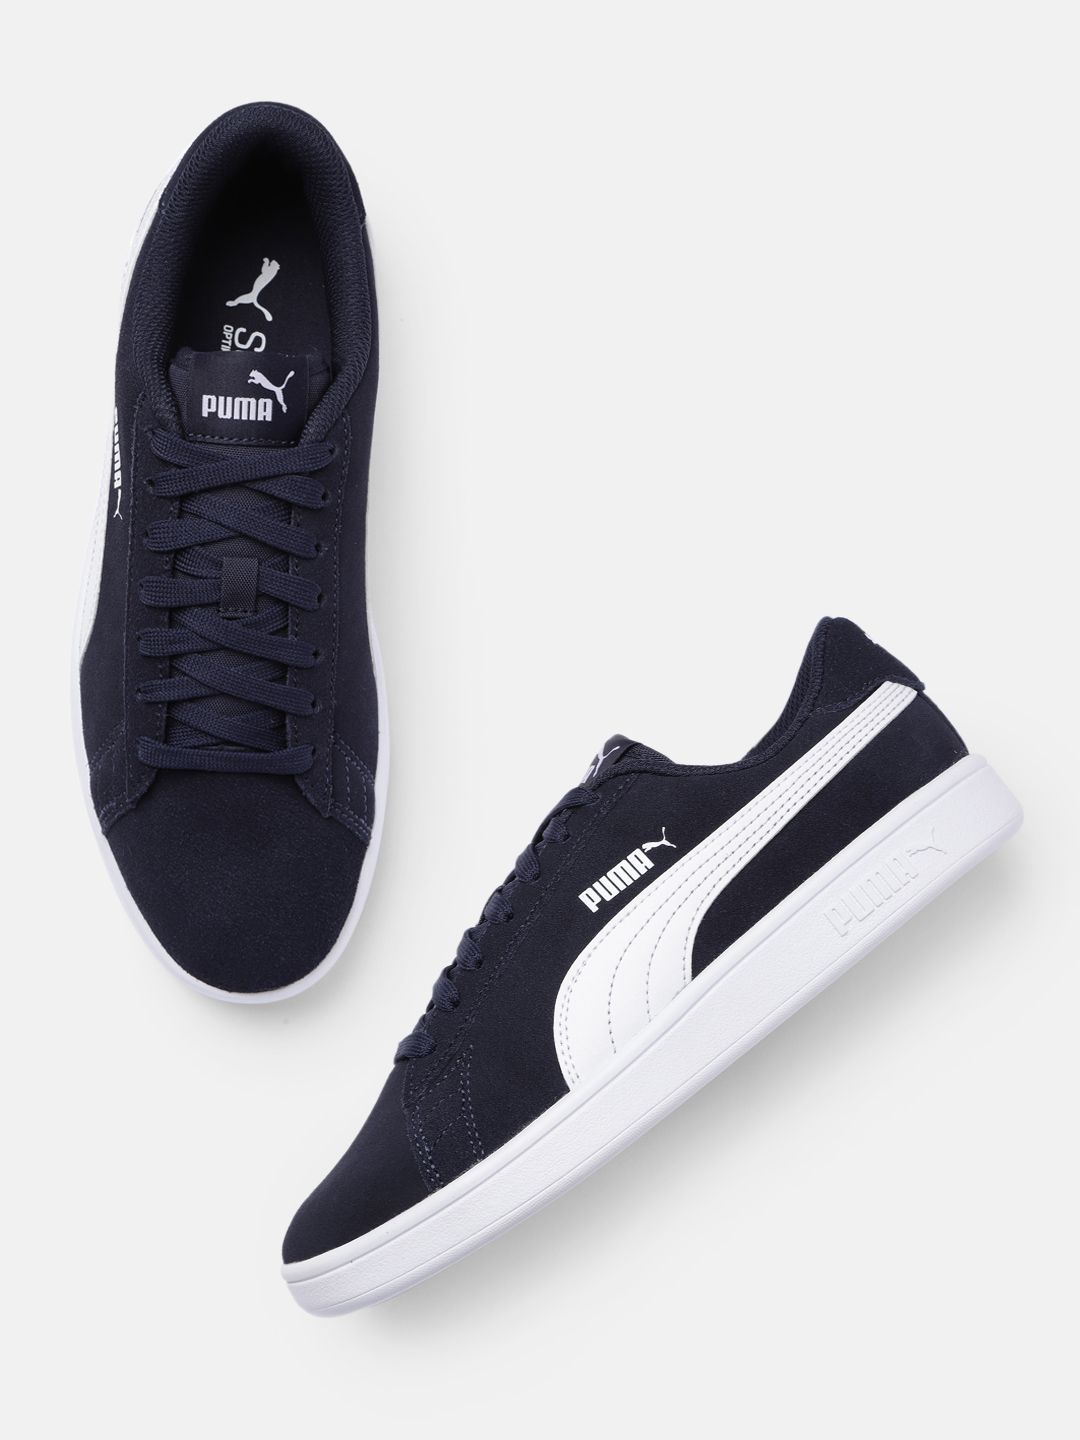 Puma Unisex Navy Blue Smash V2 Wide Colourblocked Suede Sneakers Price in India